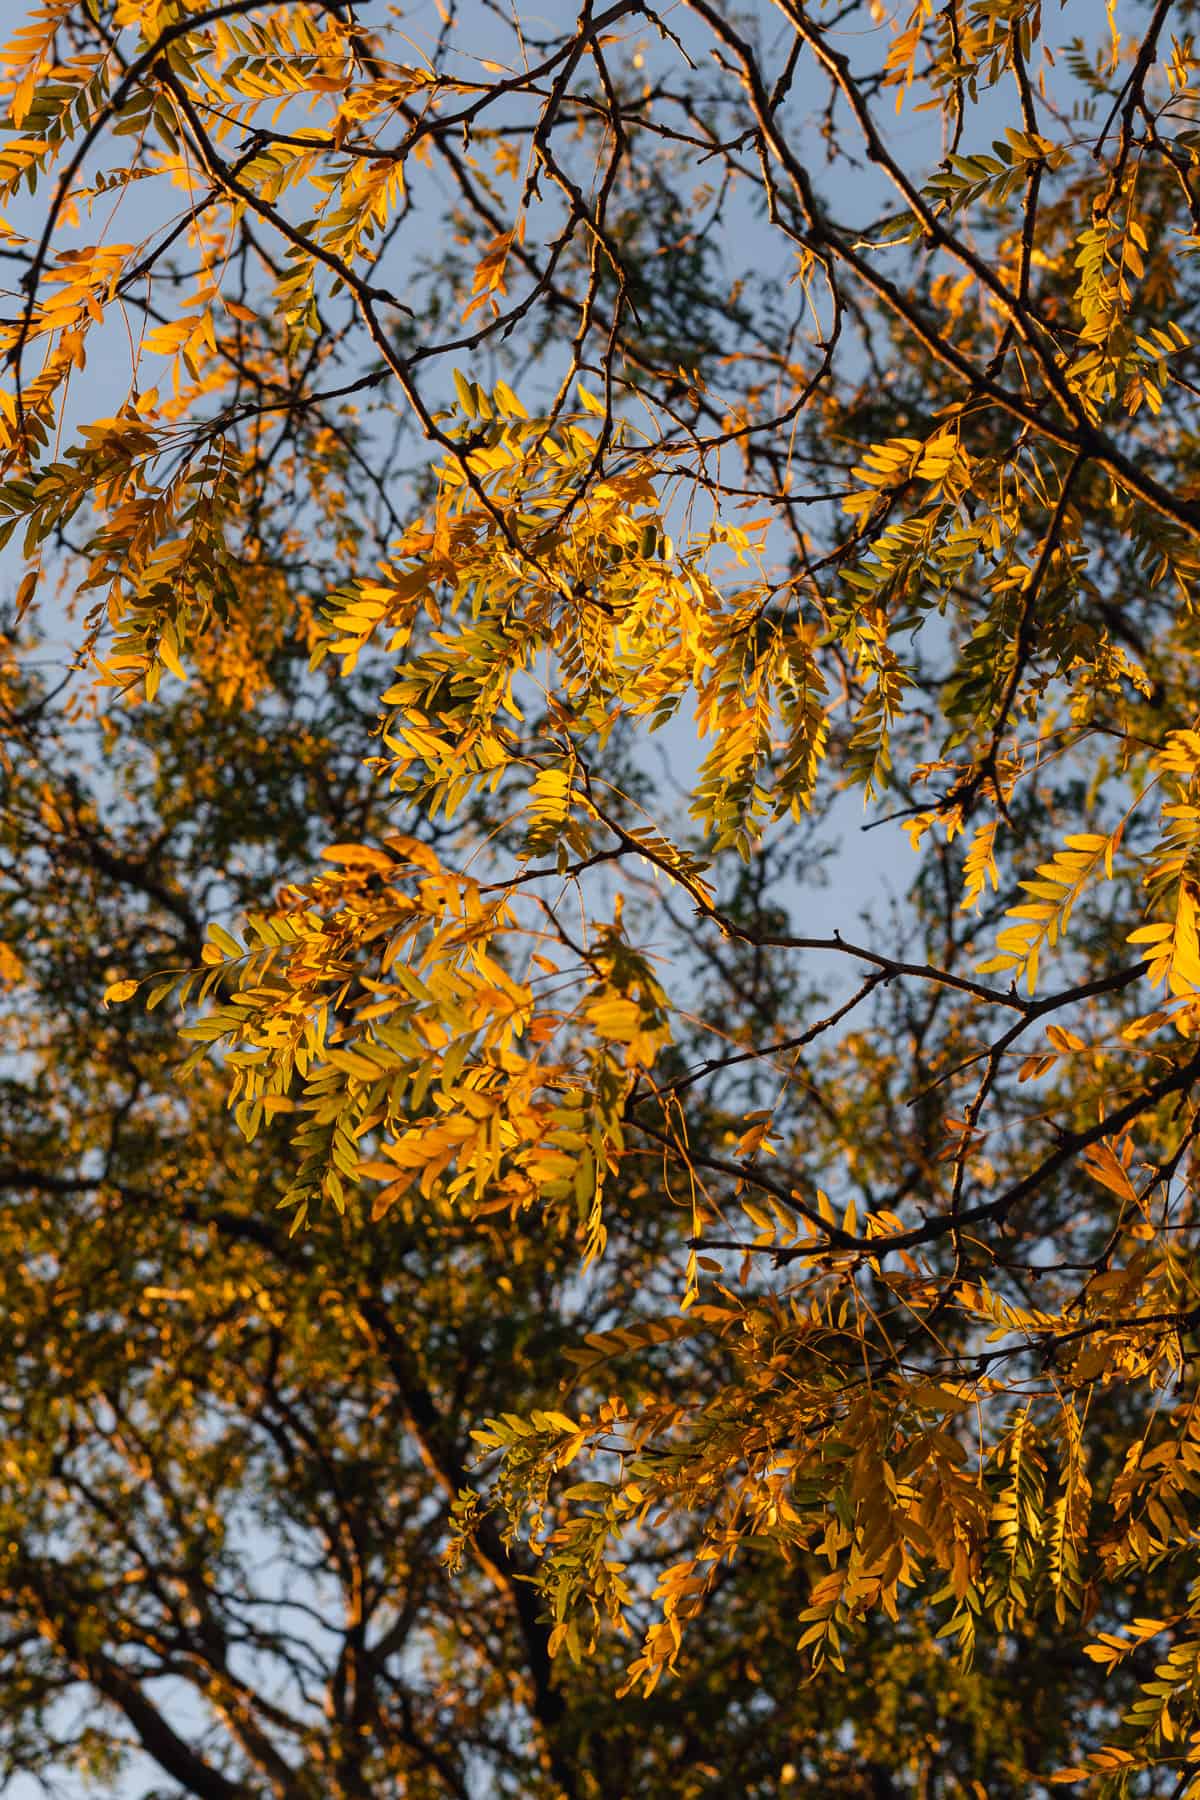 pretty fall trees and colors of yellow with branches